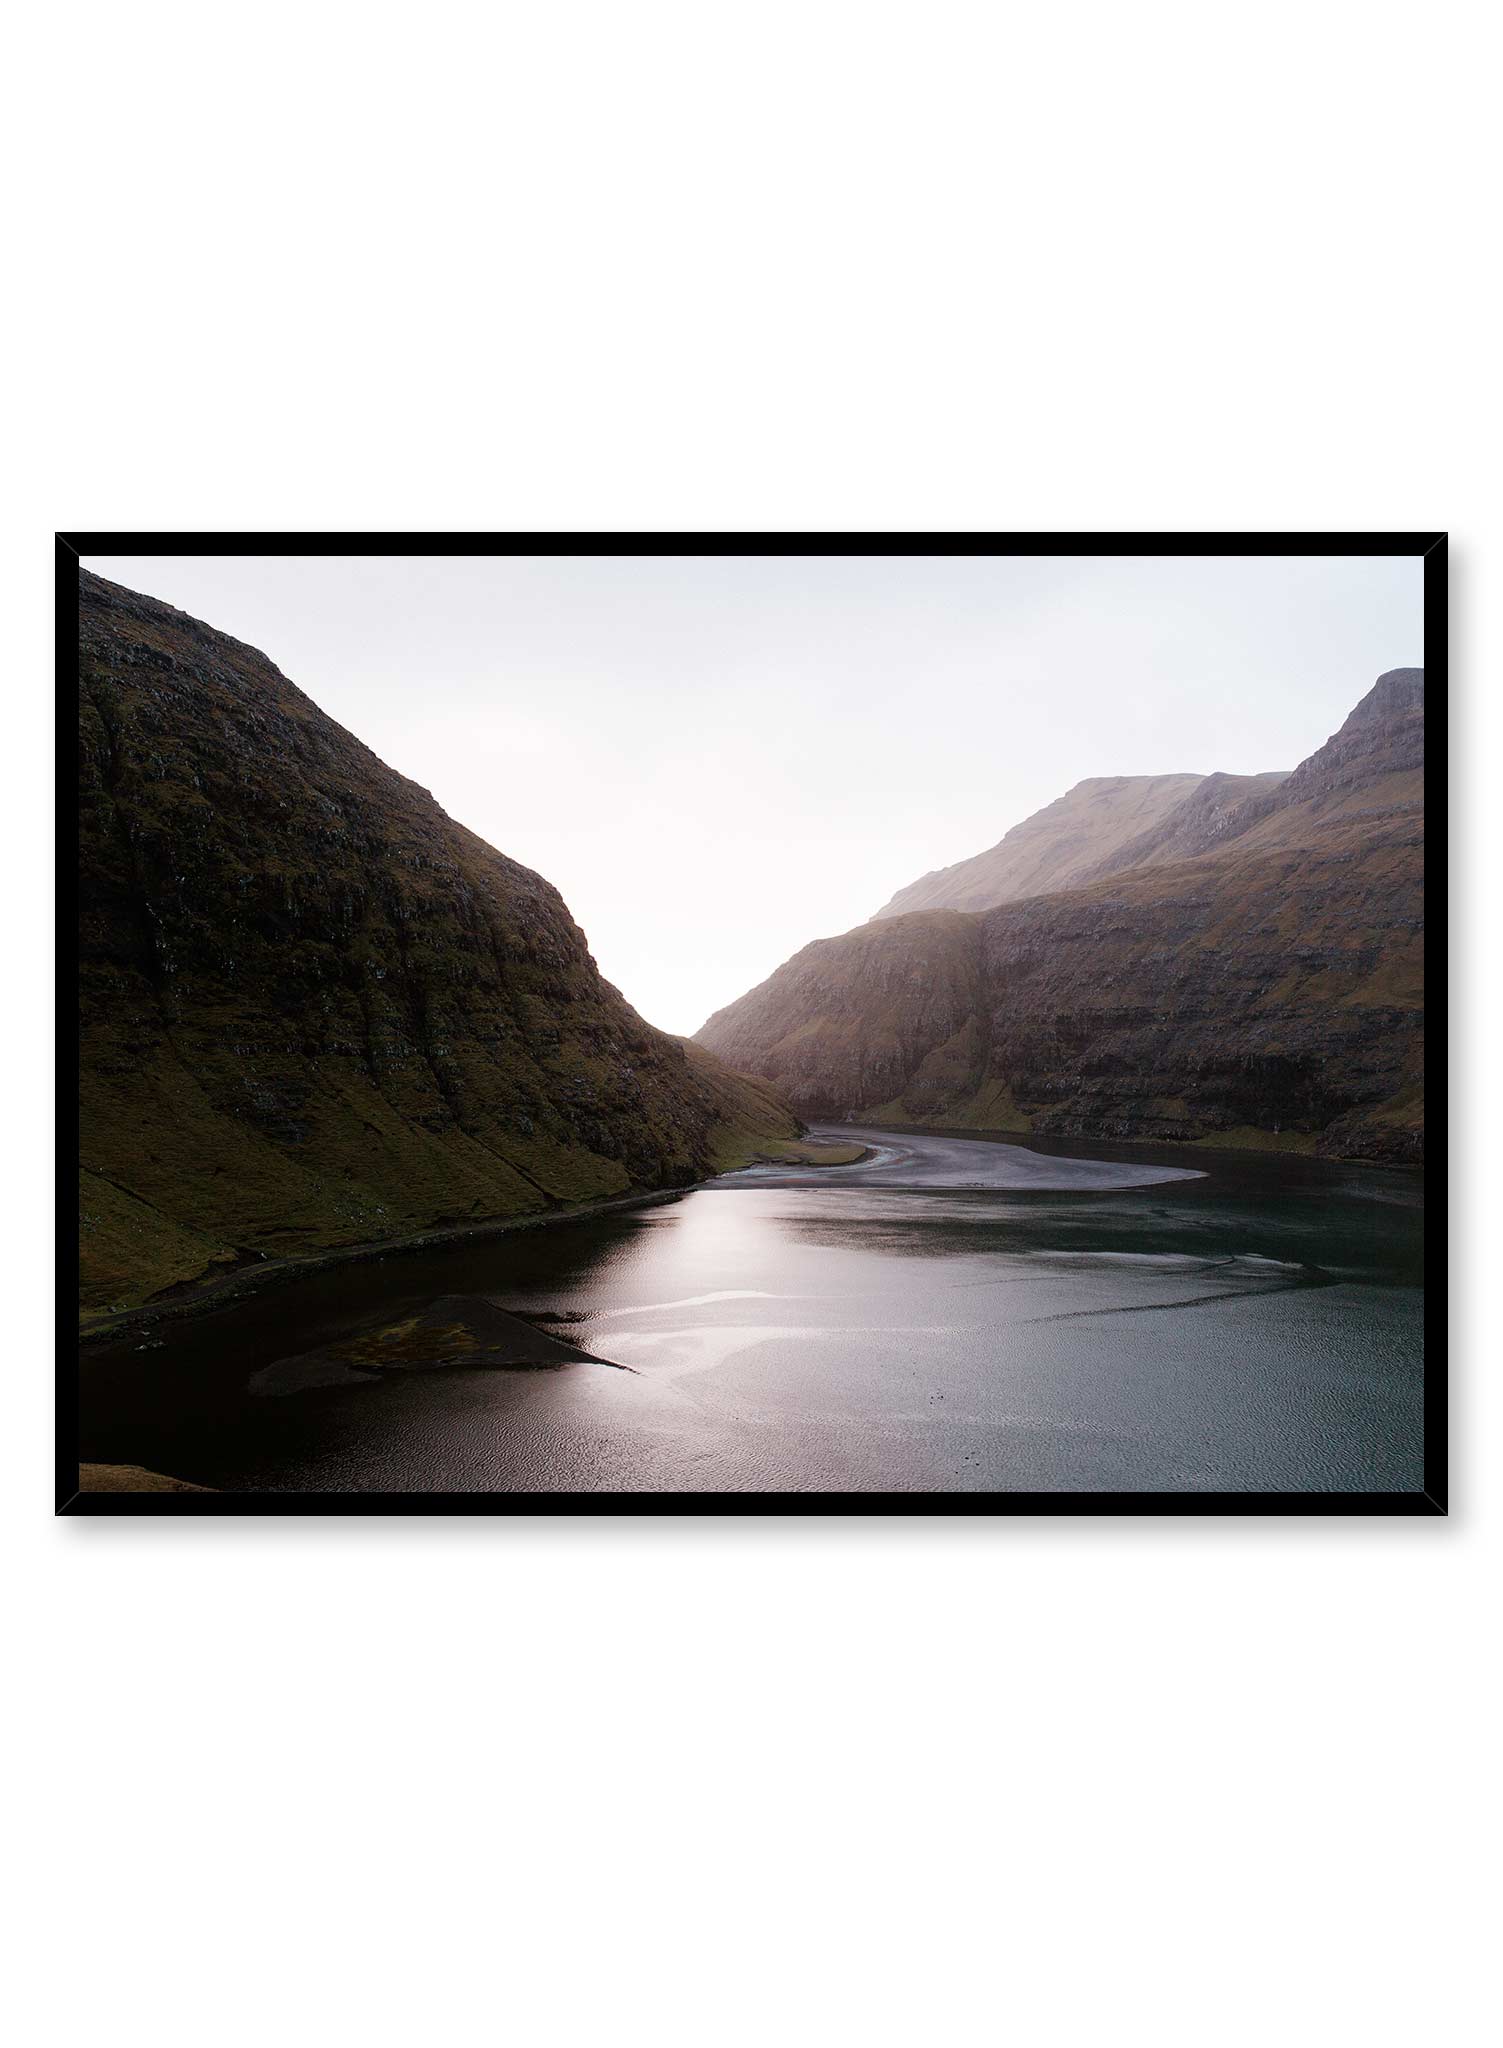 Infinite Valley' is a landscape photography poster by Opposite Wall of a calm river passing through tall mountains in the Faroe Islands.